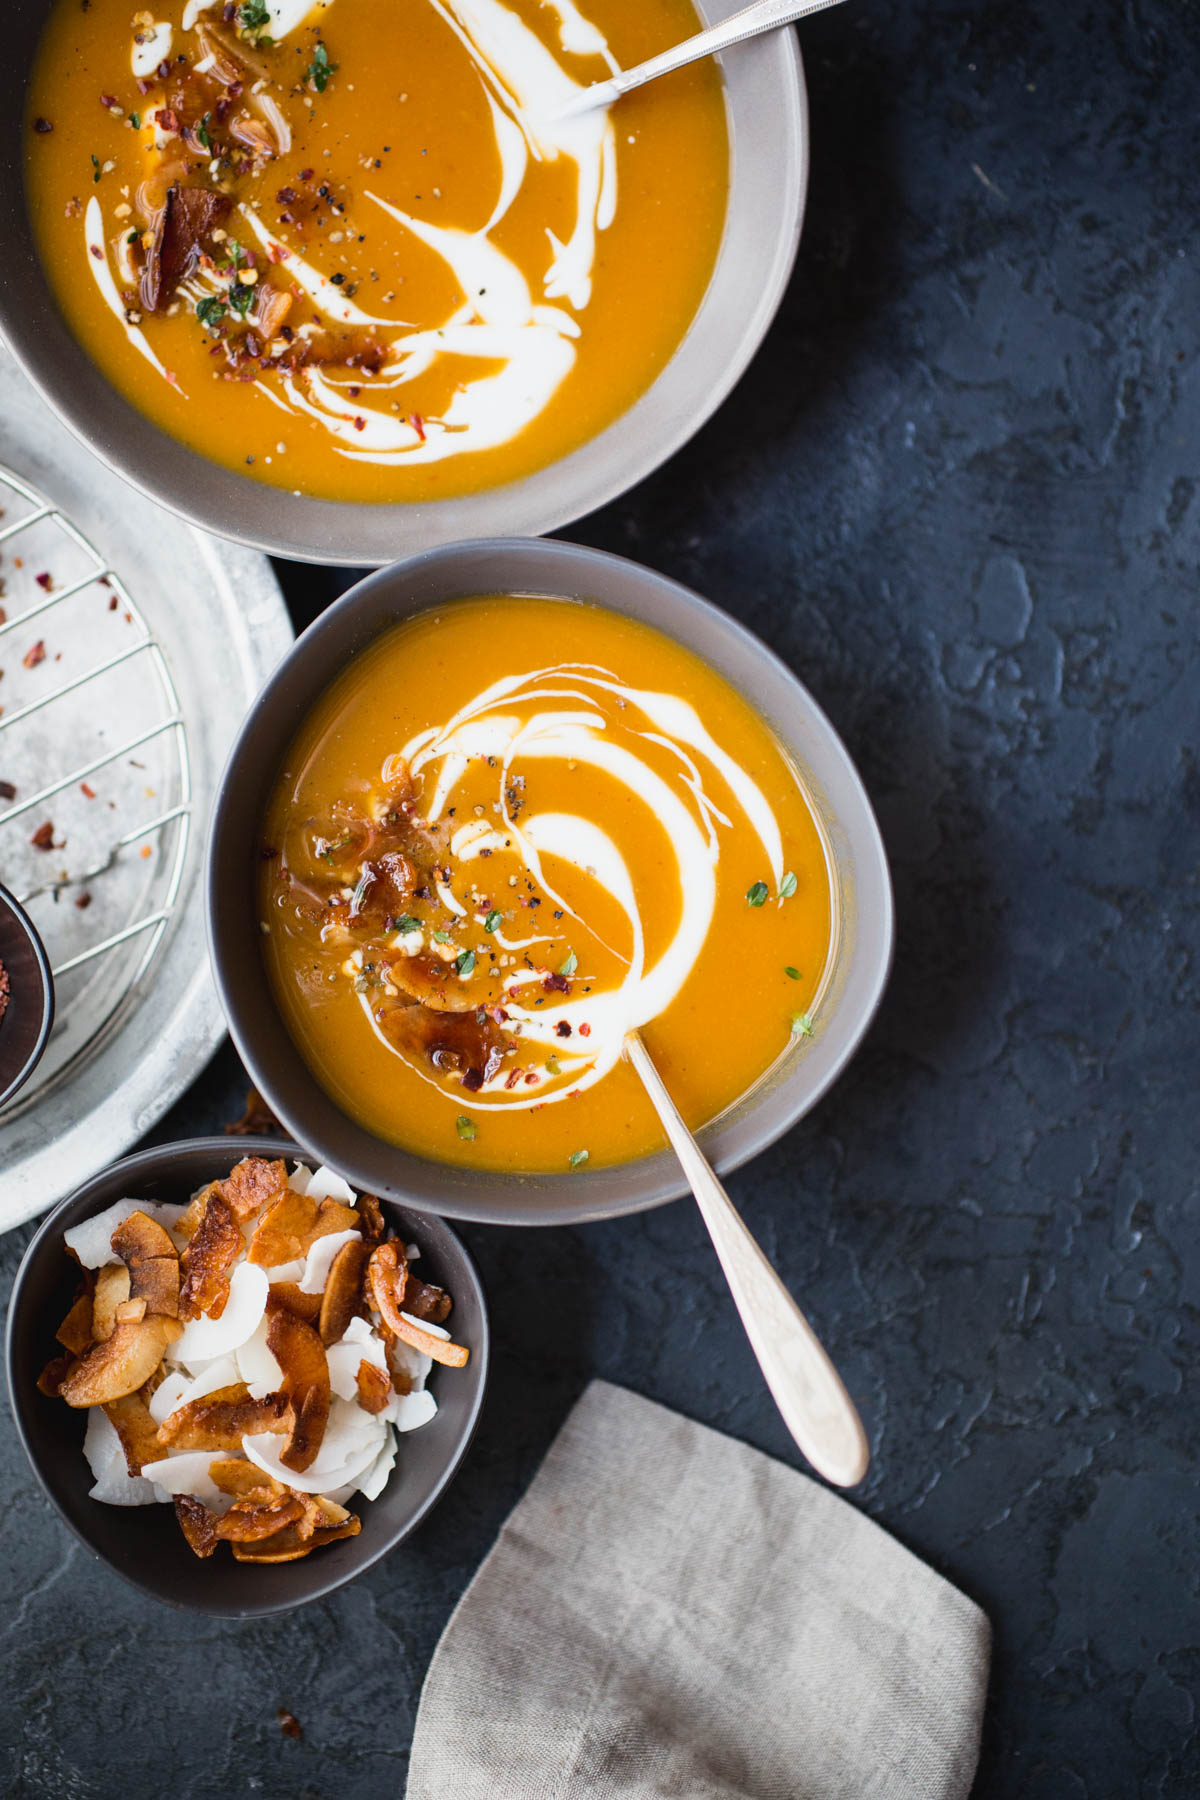 10 Vegetarian Soup Recipes To Get You Excited For Cooler Weather